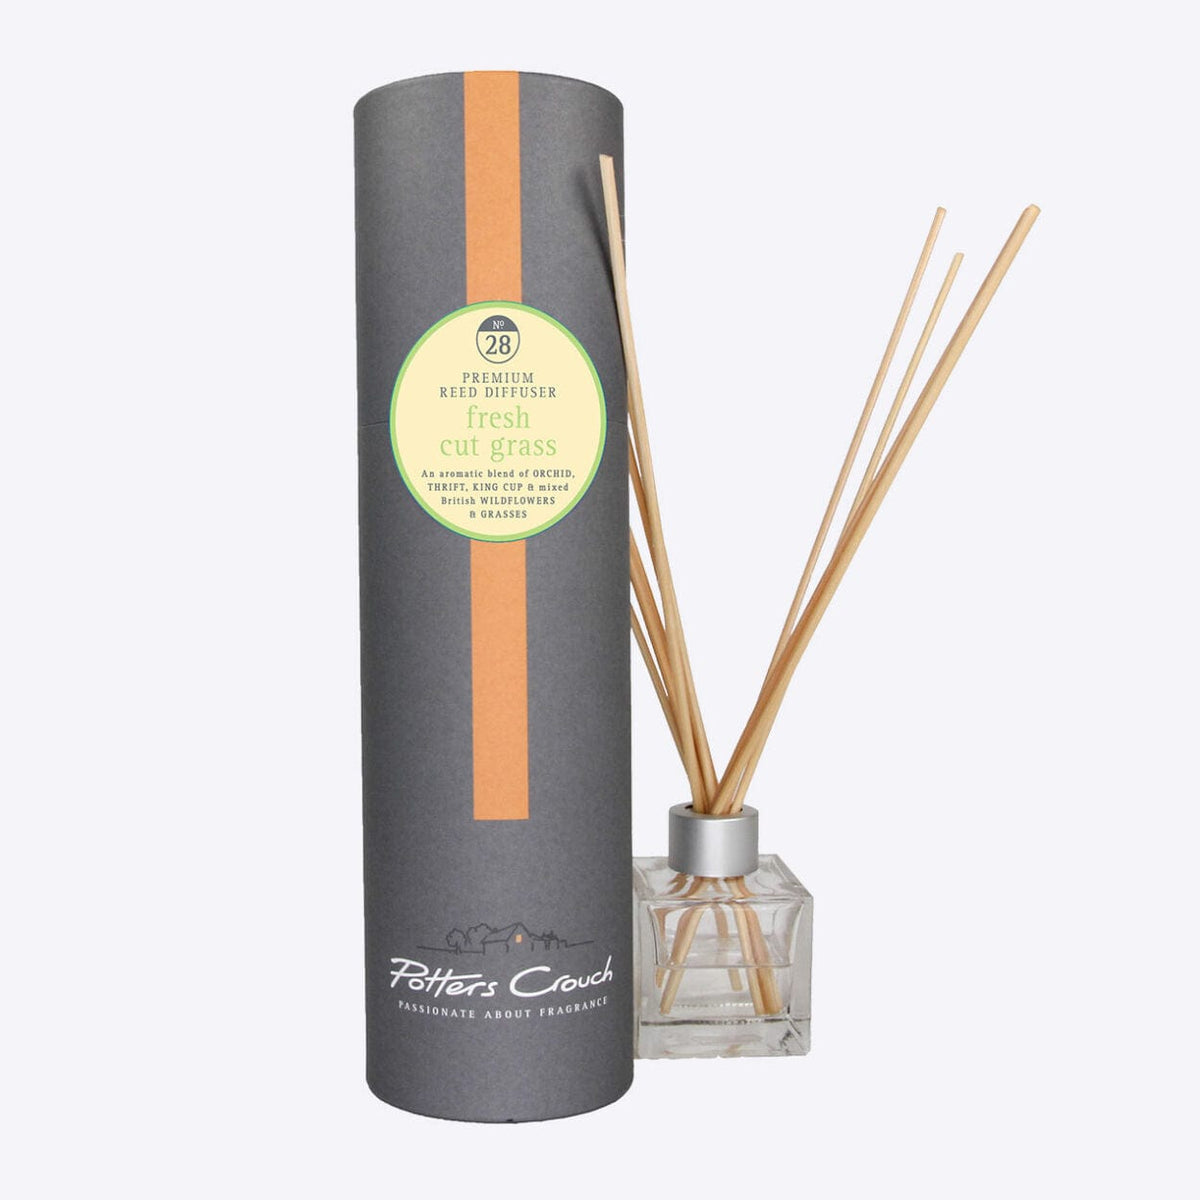 Potters Crouch Fresh Cut Grass Scented Reed Diffuser